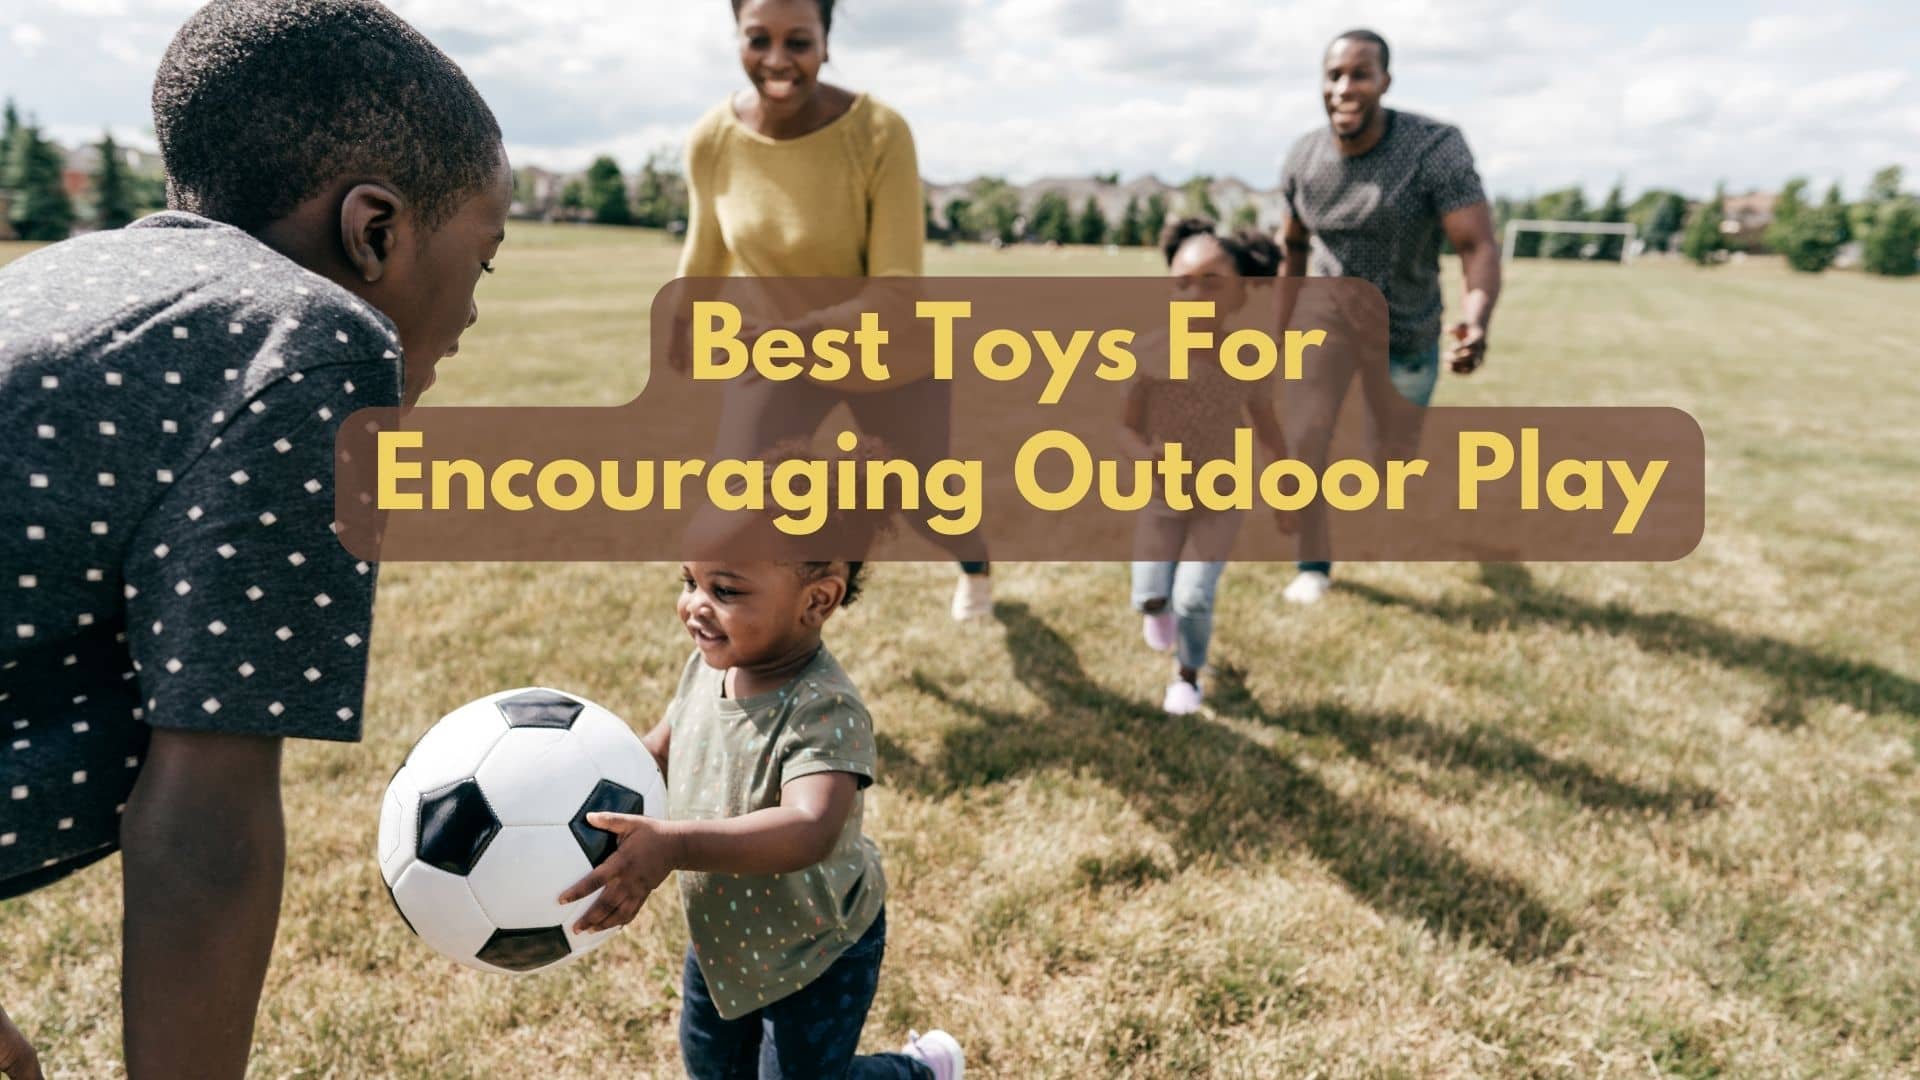 What Are The Best Toys For Encouraging Outdoor Play?